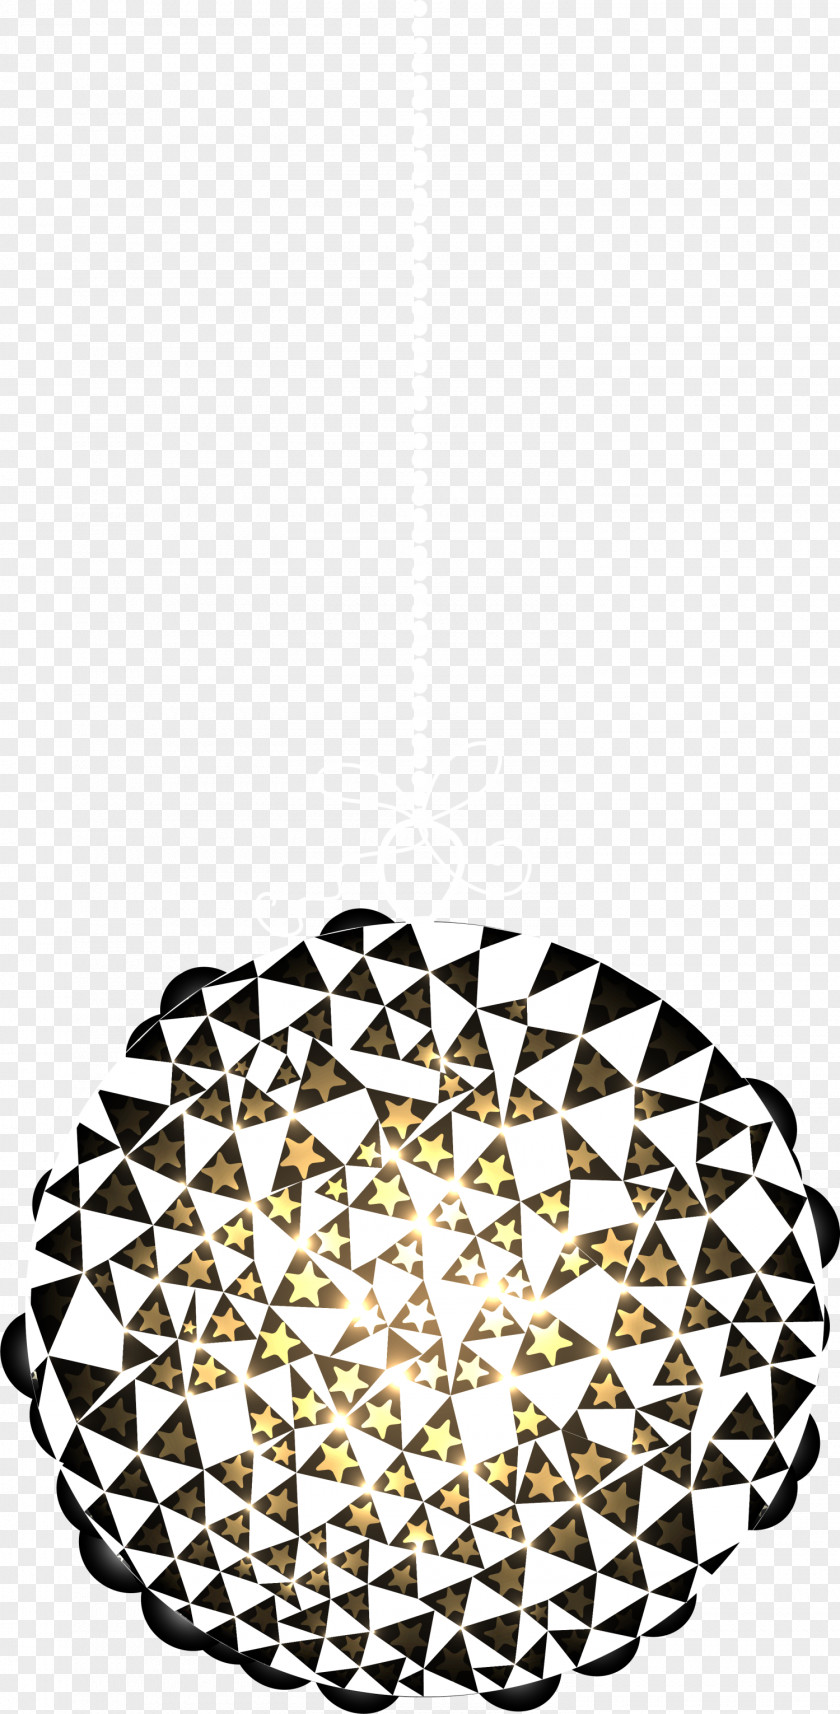 The Golden Star Ornaments Ornament Pattern PNG